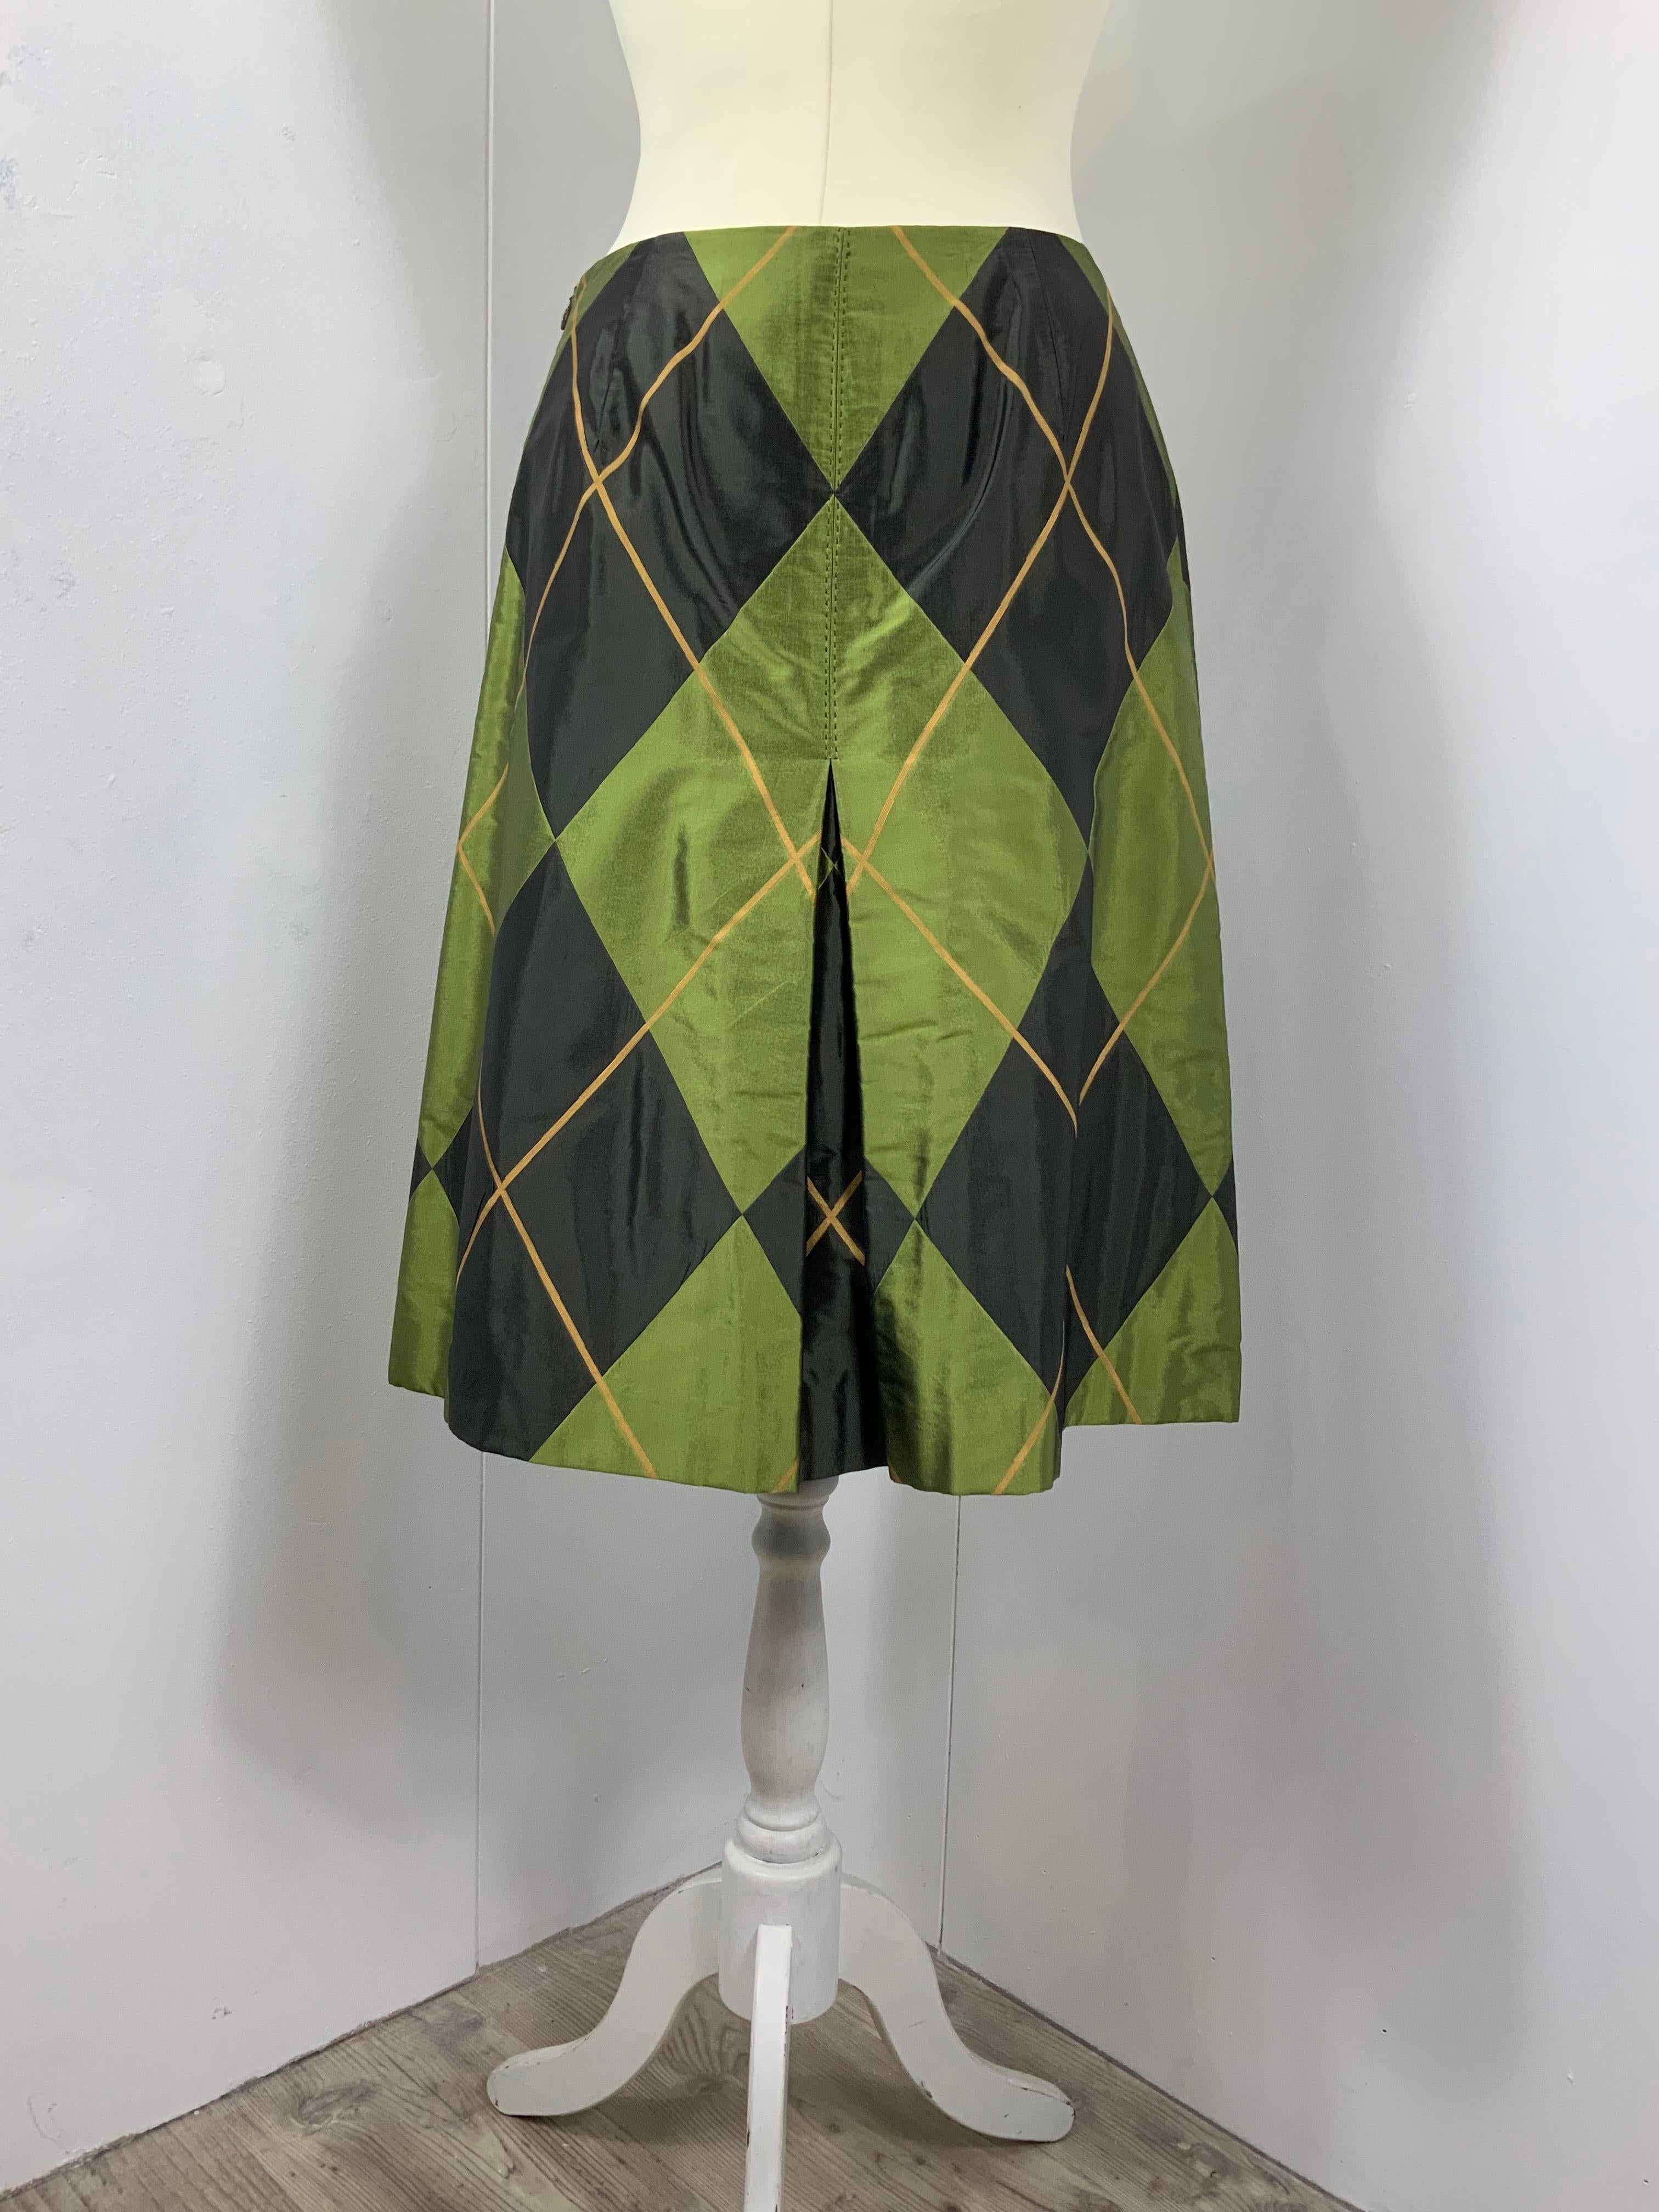 Valentino Roma Skirt.
Fabric is a mix between acetate and silk. Shining material.
Lining in cupro.
Featuring rhombus pattern and lateral zip closure.
Size 40 Italian.
Waist 38 cm
Length 58 cm
Conditions: Good - Previously owned and gently worn, with